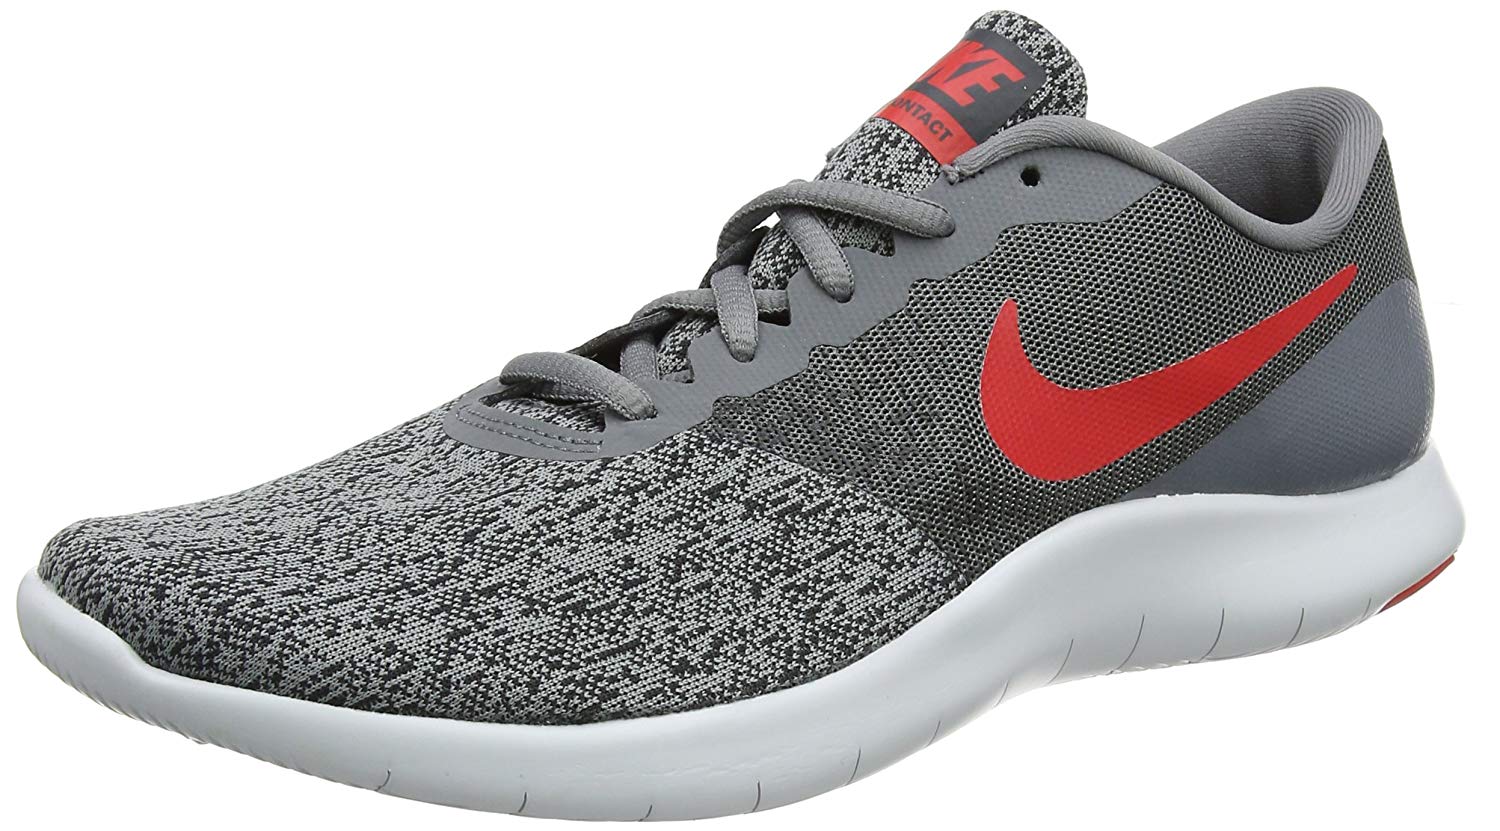 nike shoes red and grey